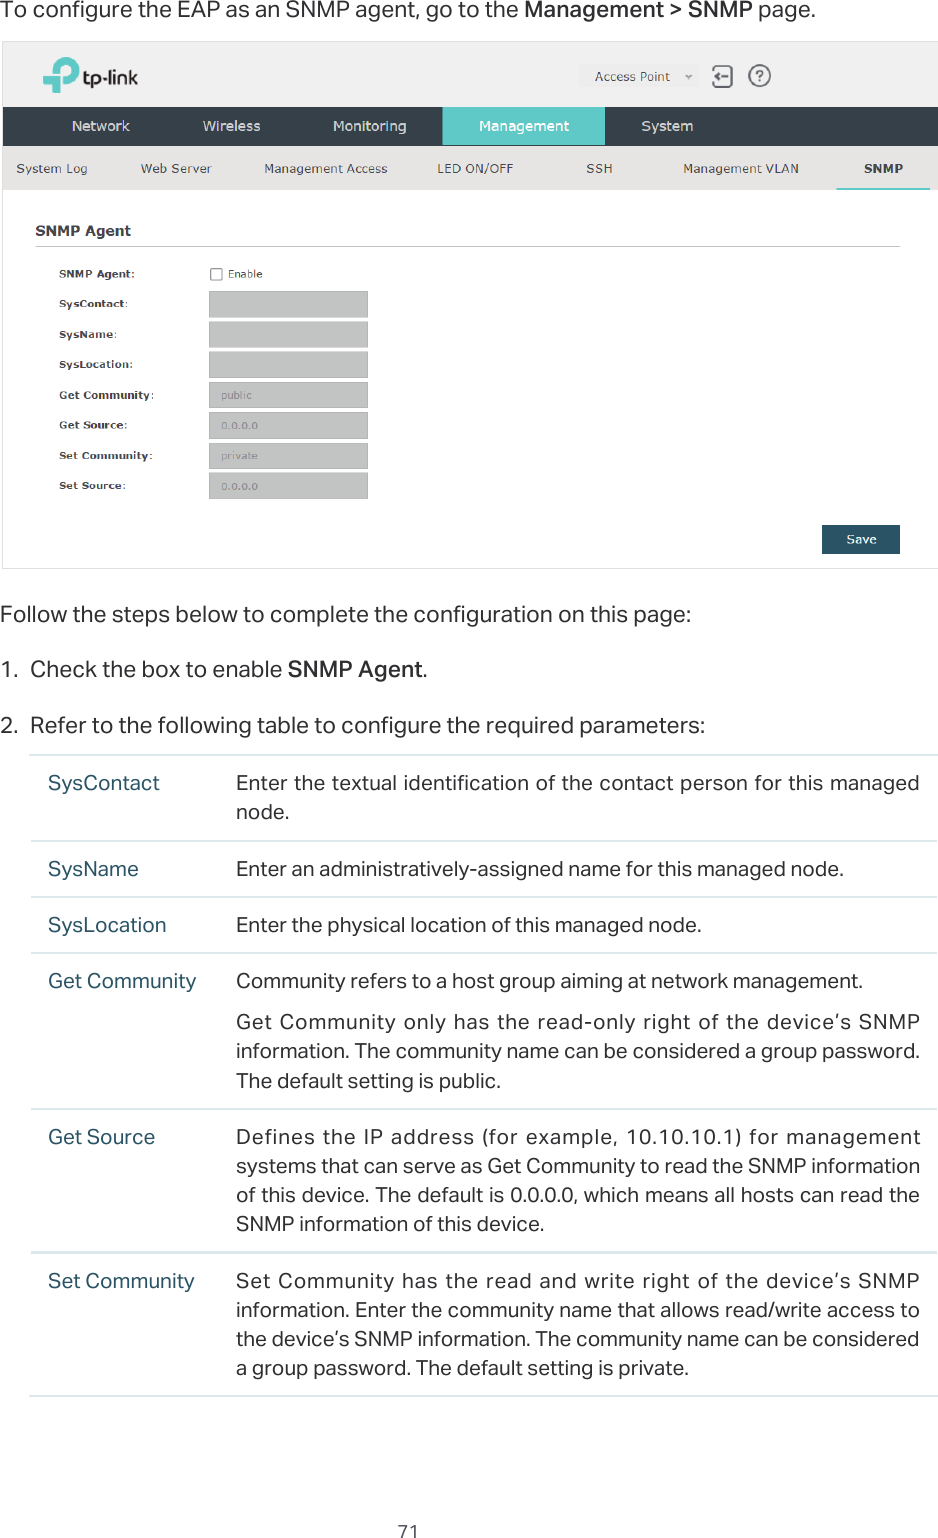  71To configure the EAP as an SNMP agent, go to the Management &gt; SNMP page.Follow the steps below to complete the configuration on this page:1. Check the box to enable SNMP Agent.2. Refer to the following table to configure the required parameters:SysContact Enter the textual identification of the contact person for this managed node.SysName Enter an administratively-assigned name for this managed node.SysLocation Enter the physical location of this managed node.Get Community Community refers to a host group aiming at network management.Get Community only has the read-only right of the device’s SNMP information. The community name can be considered a group password. The default setting is public.Get Source Defines the IP address (for example, 10.10.10.1) for management systems that can serve as Get Community to read the SNMP information of this device. The default is 0.0.0.0, which means all hosts can read the SNMP information of this device.Set Community Set Community has the read and write right of the device’s SNMP information. Enter the community name that allows read/write access to the device’s SNMP information. The community name can be considered a group password. The default setting is private.